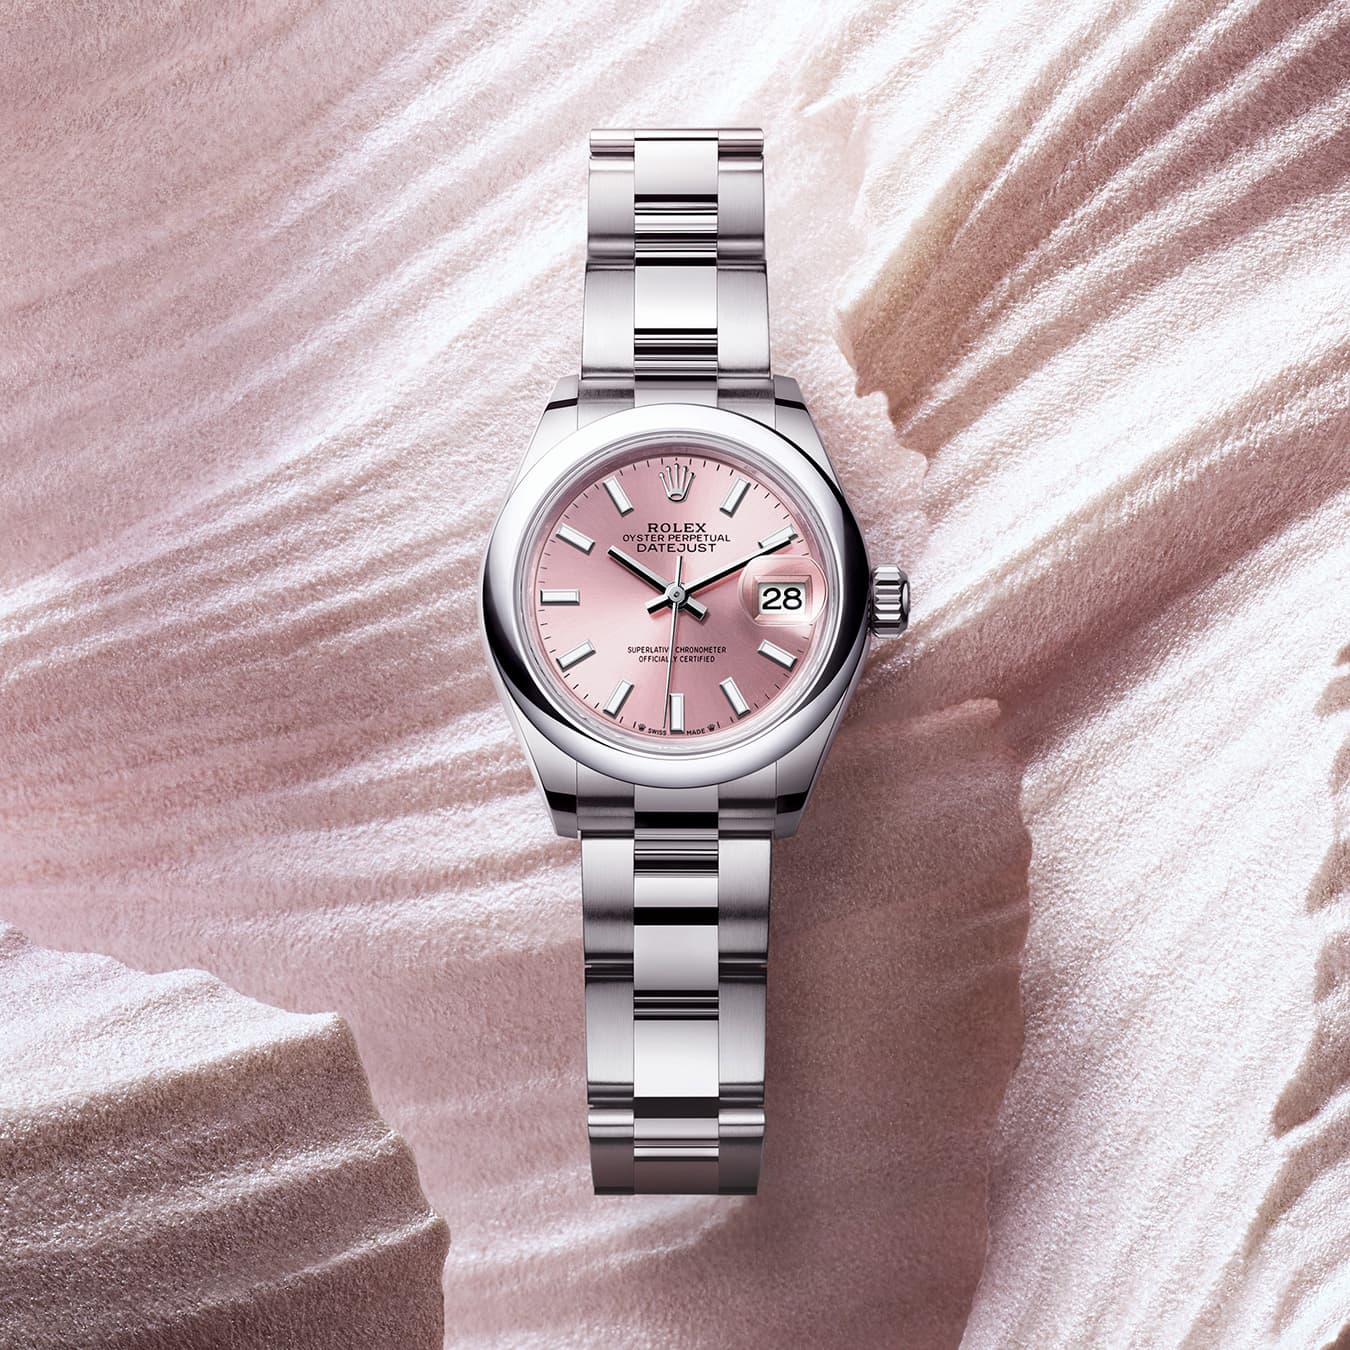 Silver Rolex Lady Datejust watch with pink dial